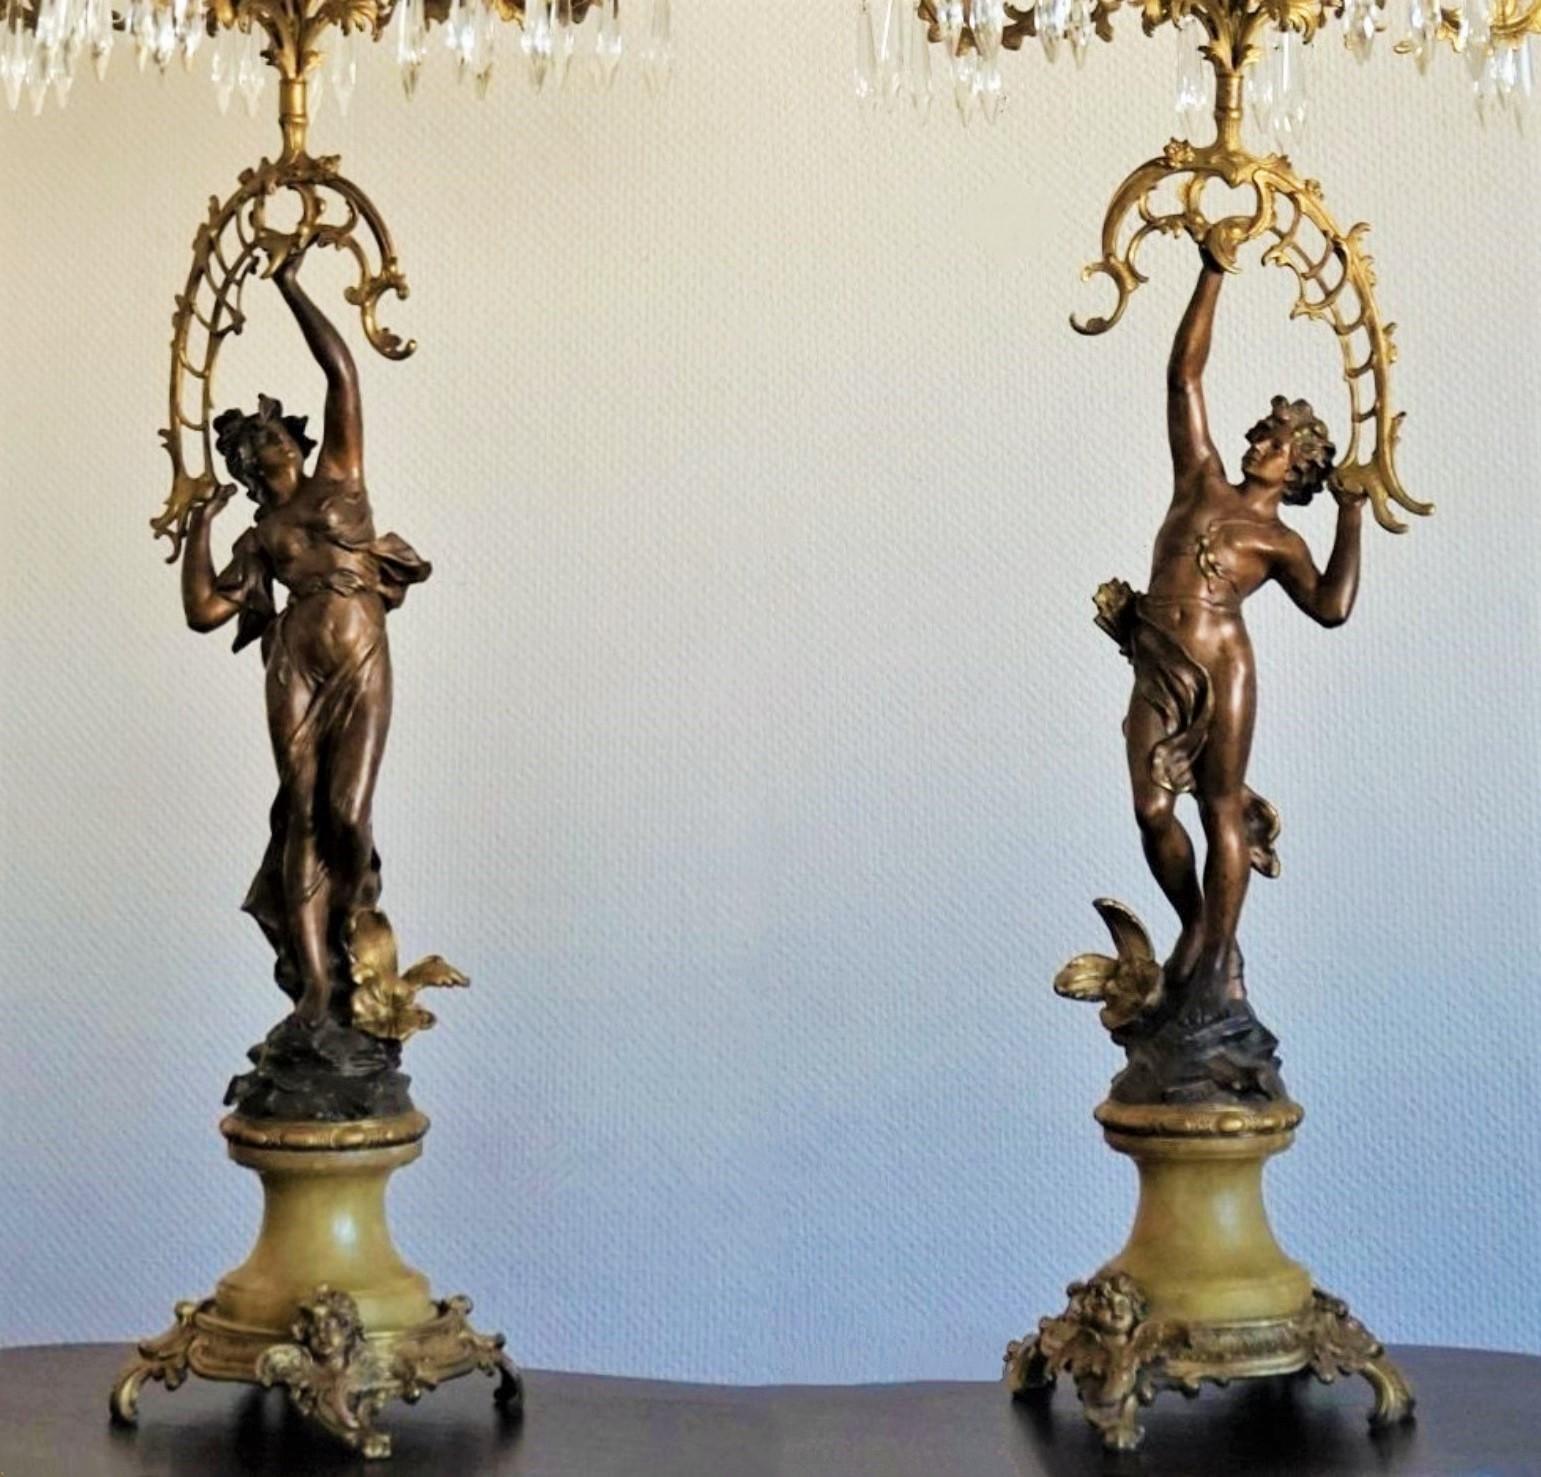 Empire 19th Century Pair of French Figurines Patinated and Doré Bronze Candelabra